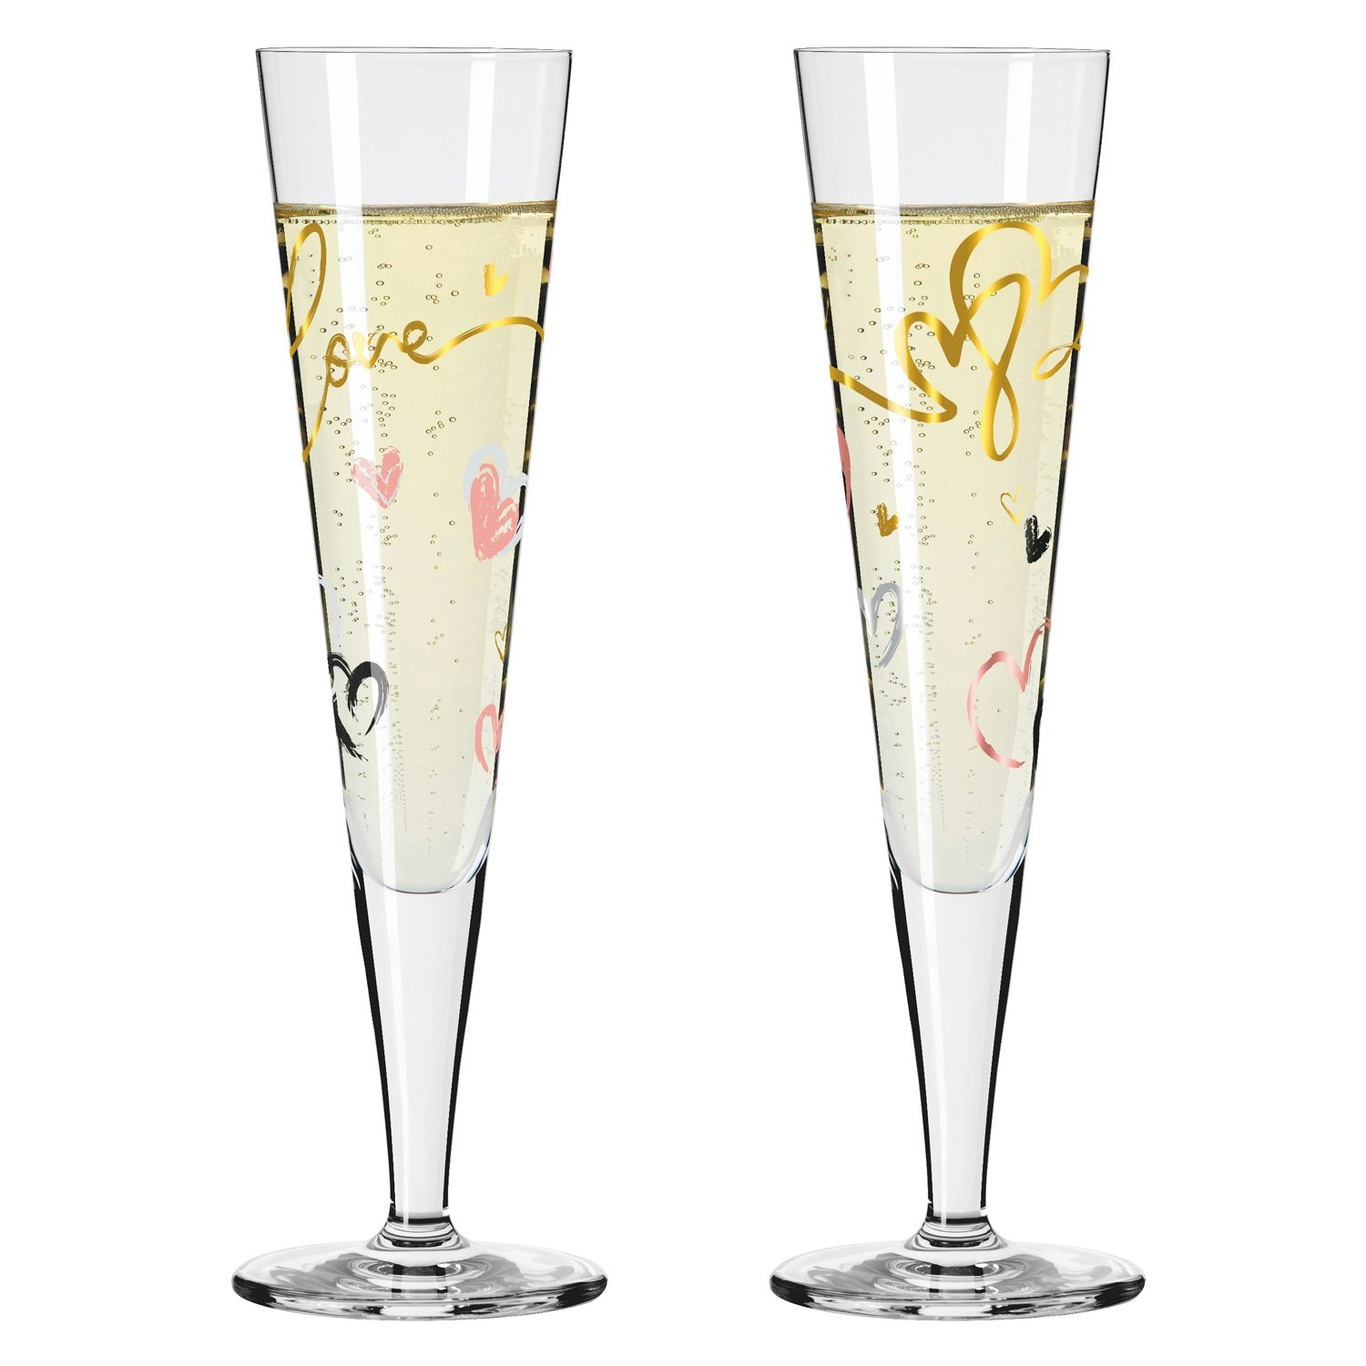 Goldnacht Champagneglas 2-pack, H23